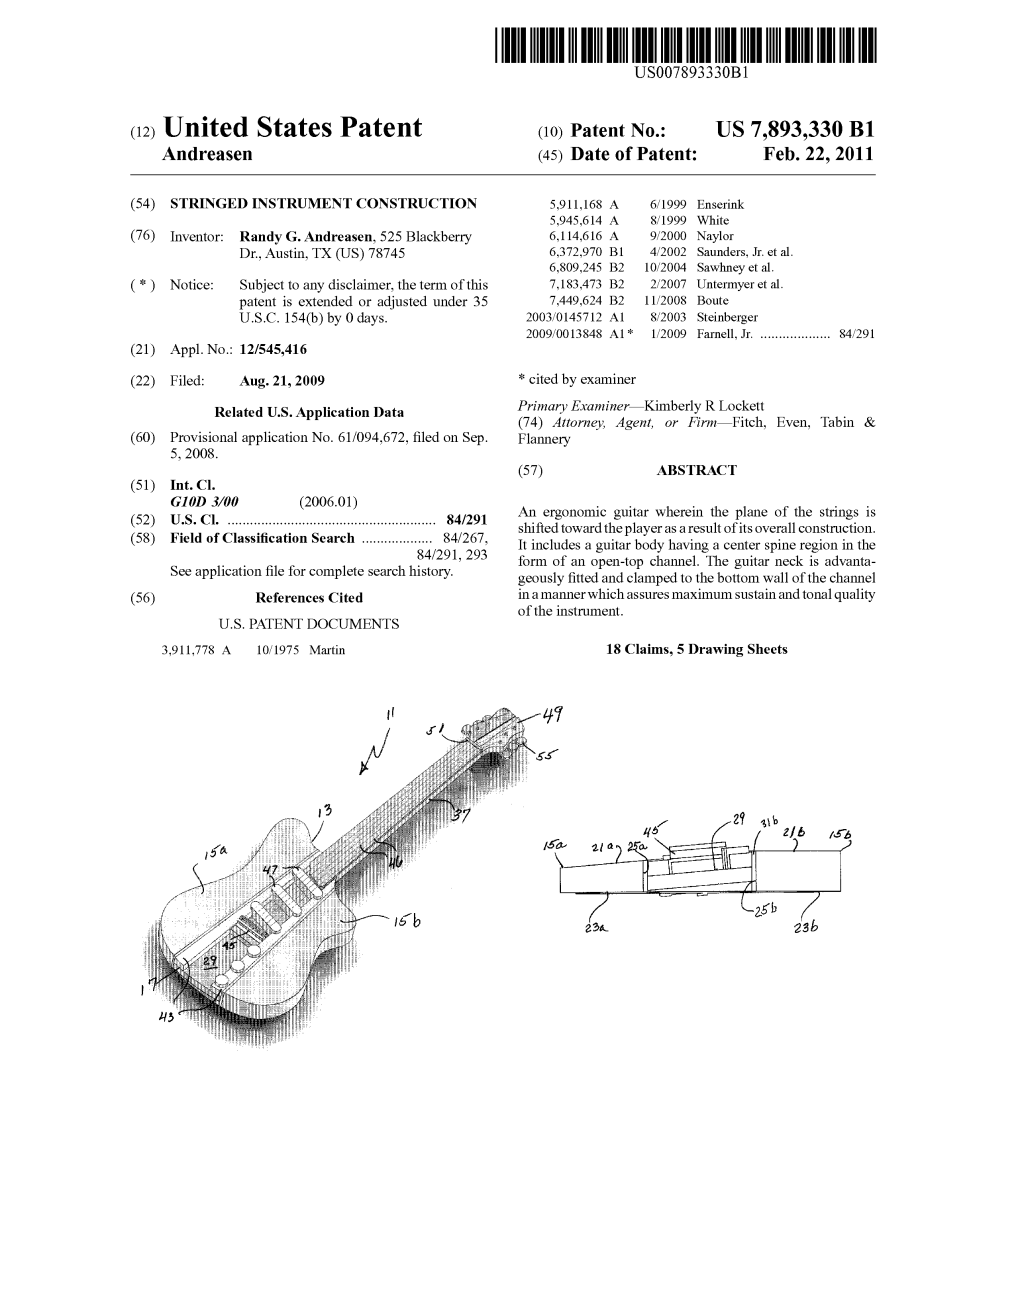 (12) Ulllted States Patent (10) Patent N0.: US 7,893,330 B1 Andreasen (45) Date of Patent: Feb